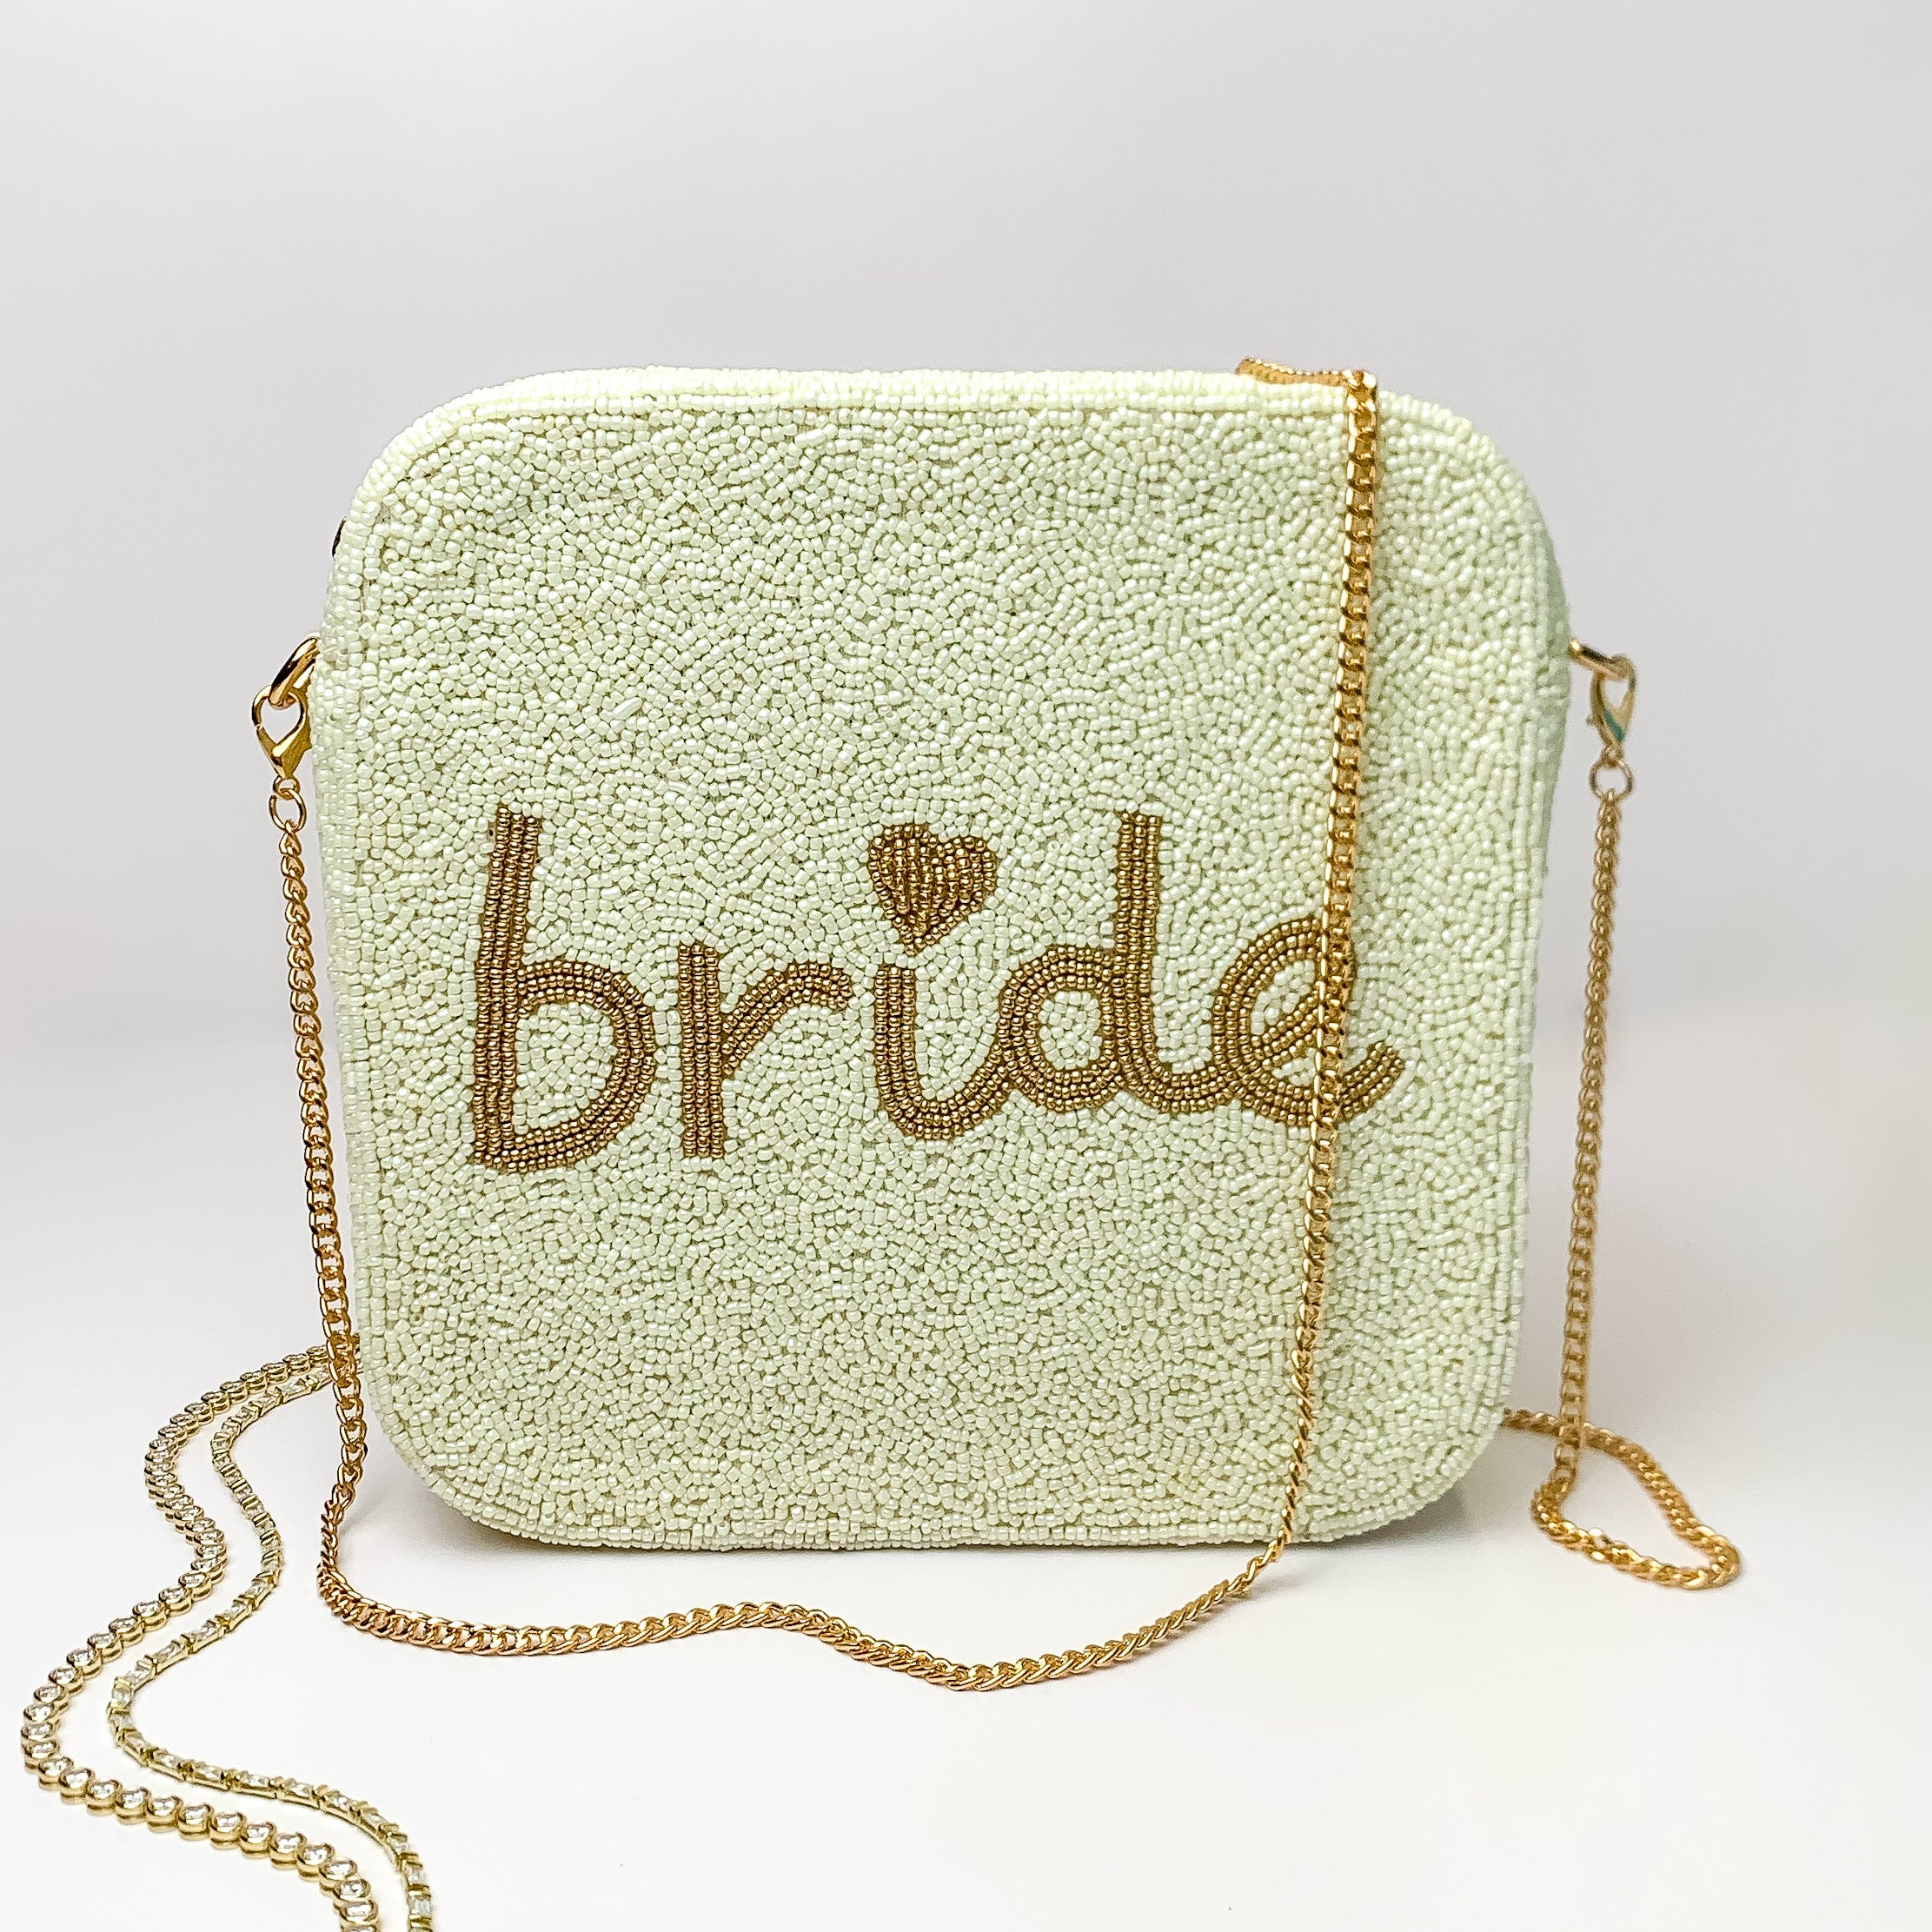 Favorite Day Beaded Bride Purse in Ivory - Giddy Up Glamour Boutique